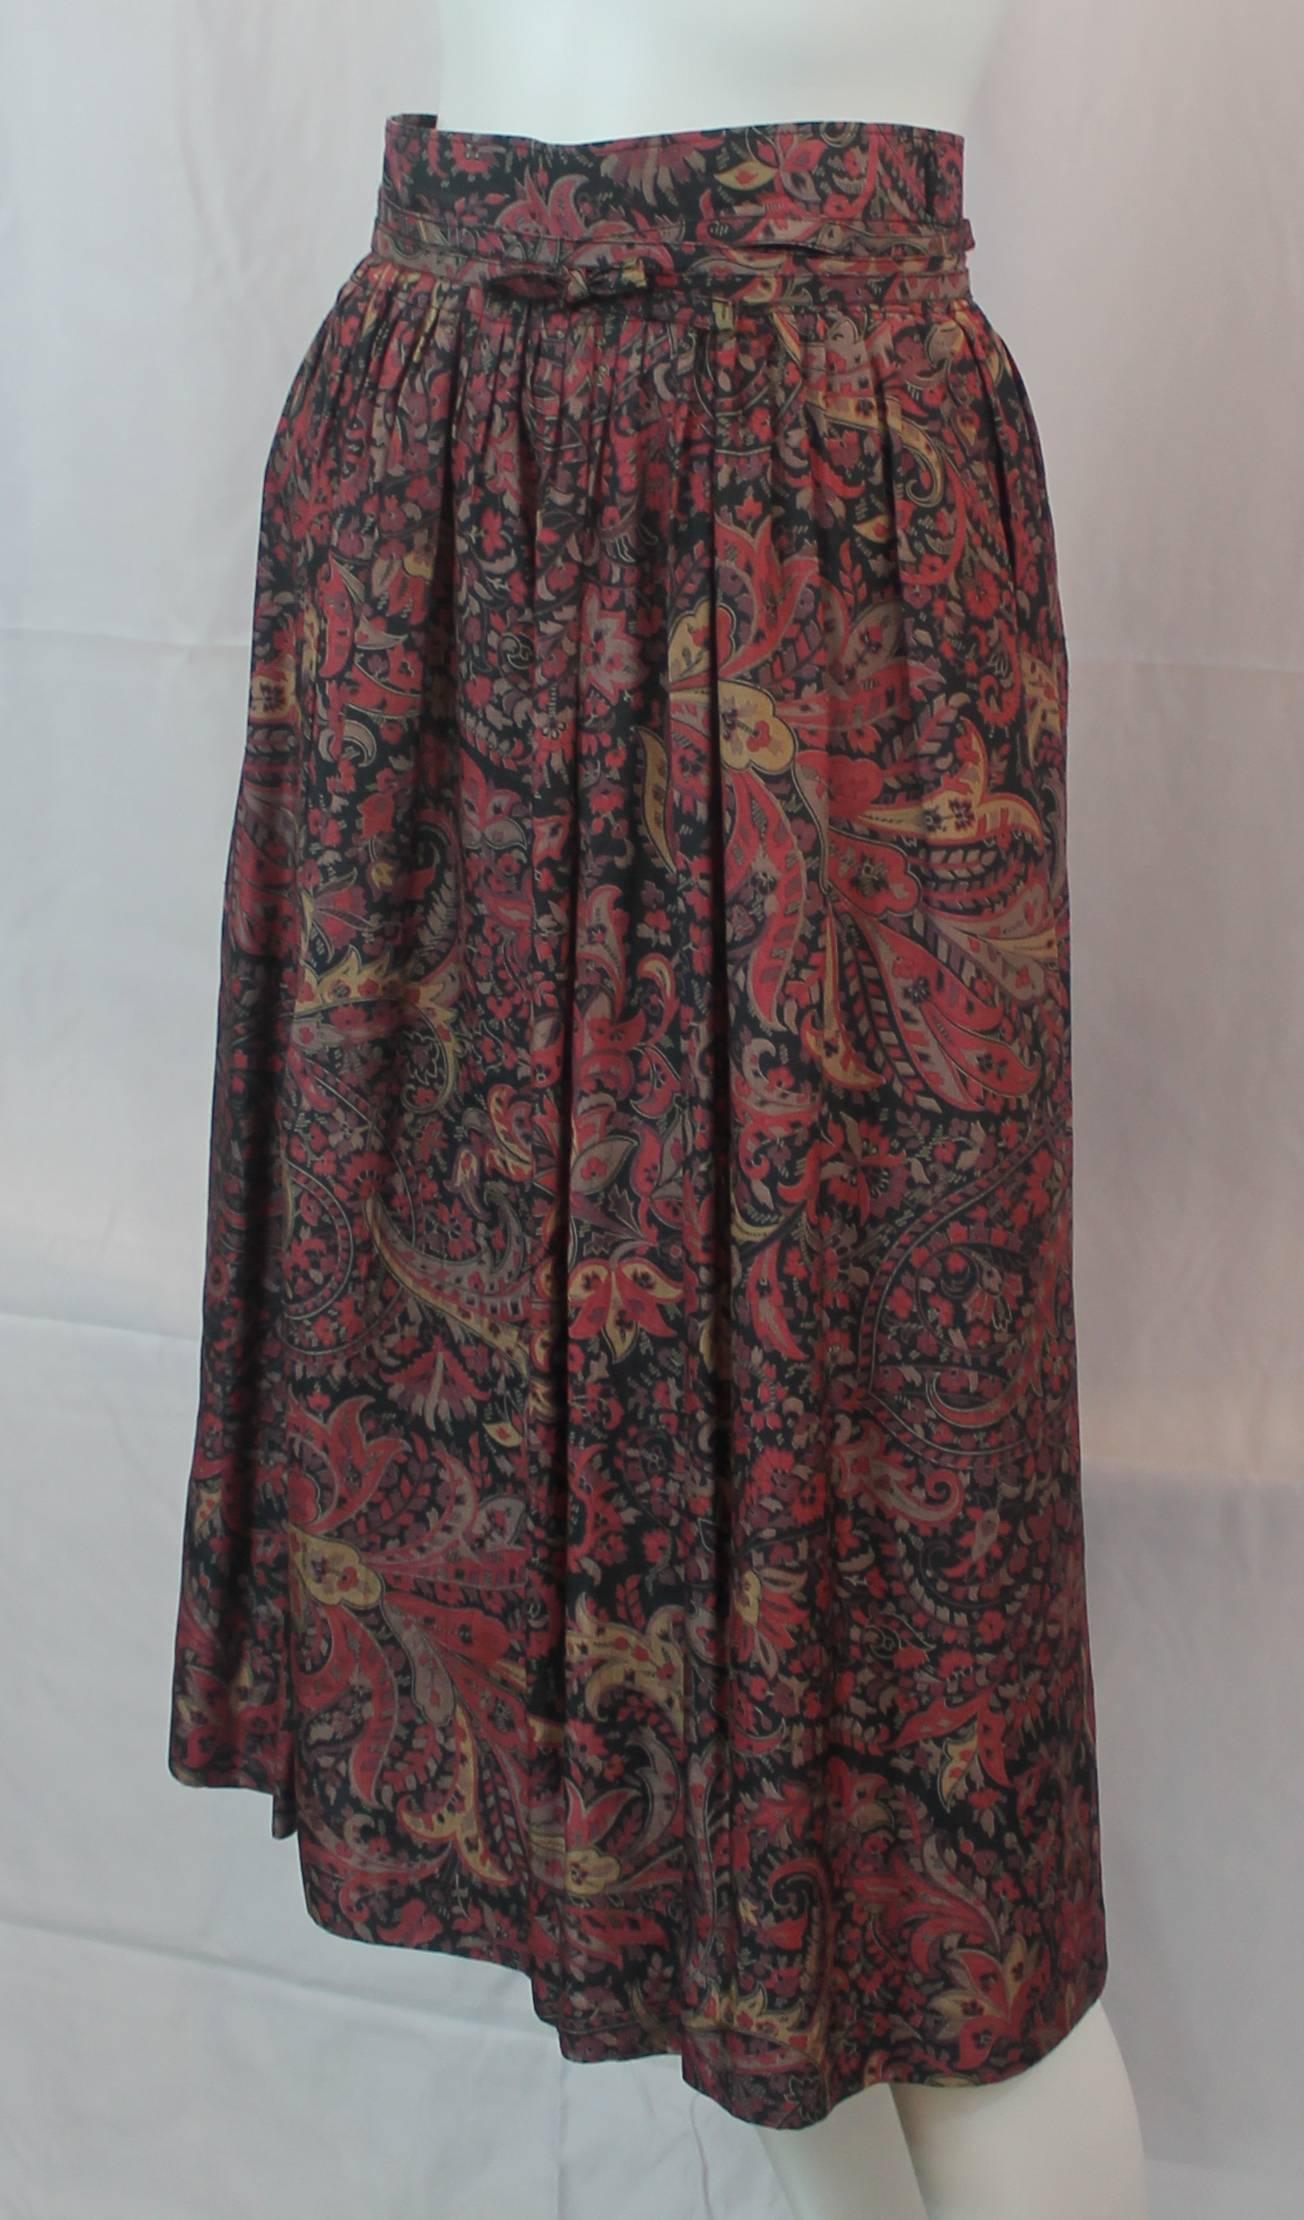 Bogner Vintage Multi-Colored Floral Print Silk Wrap Skirt - 38 - 1990's. This floral print silk skirt has a thin belt that is used to wrap the skirt around the body. The skirt is multi-colored with shades of reds, earth tones, and black. It is in